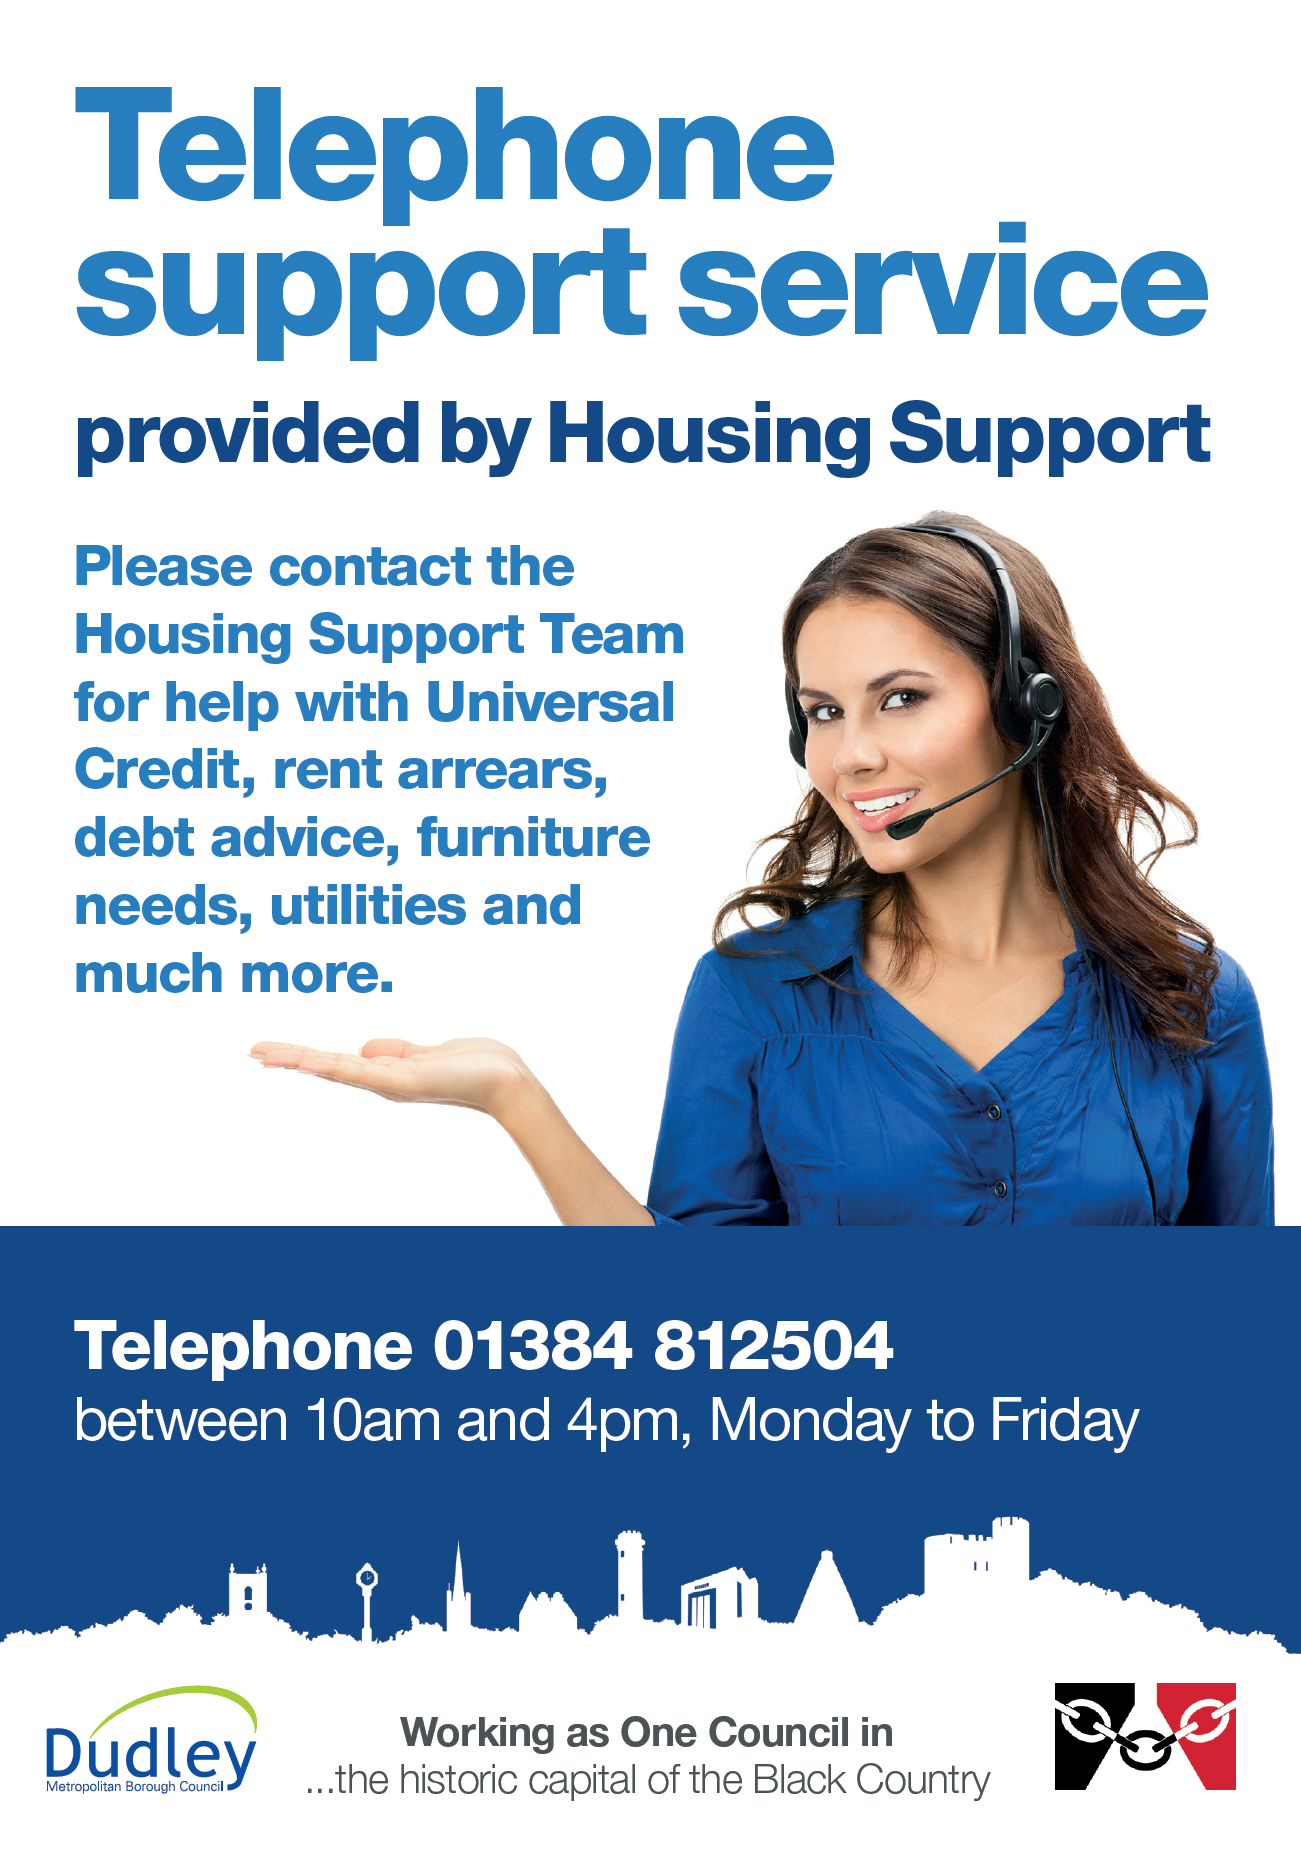 Housing Support Dudley MBC - Telephone Support Service